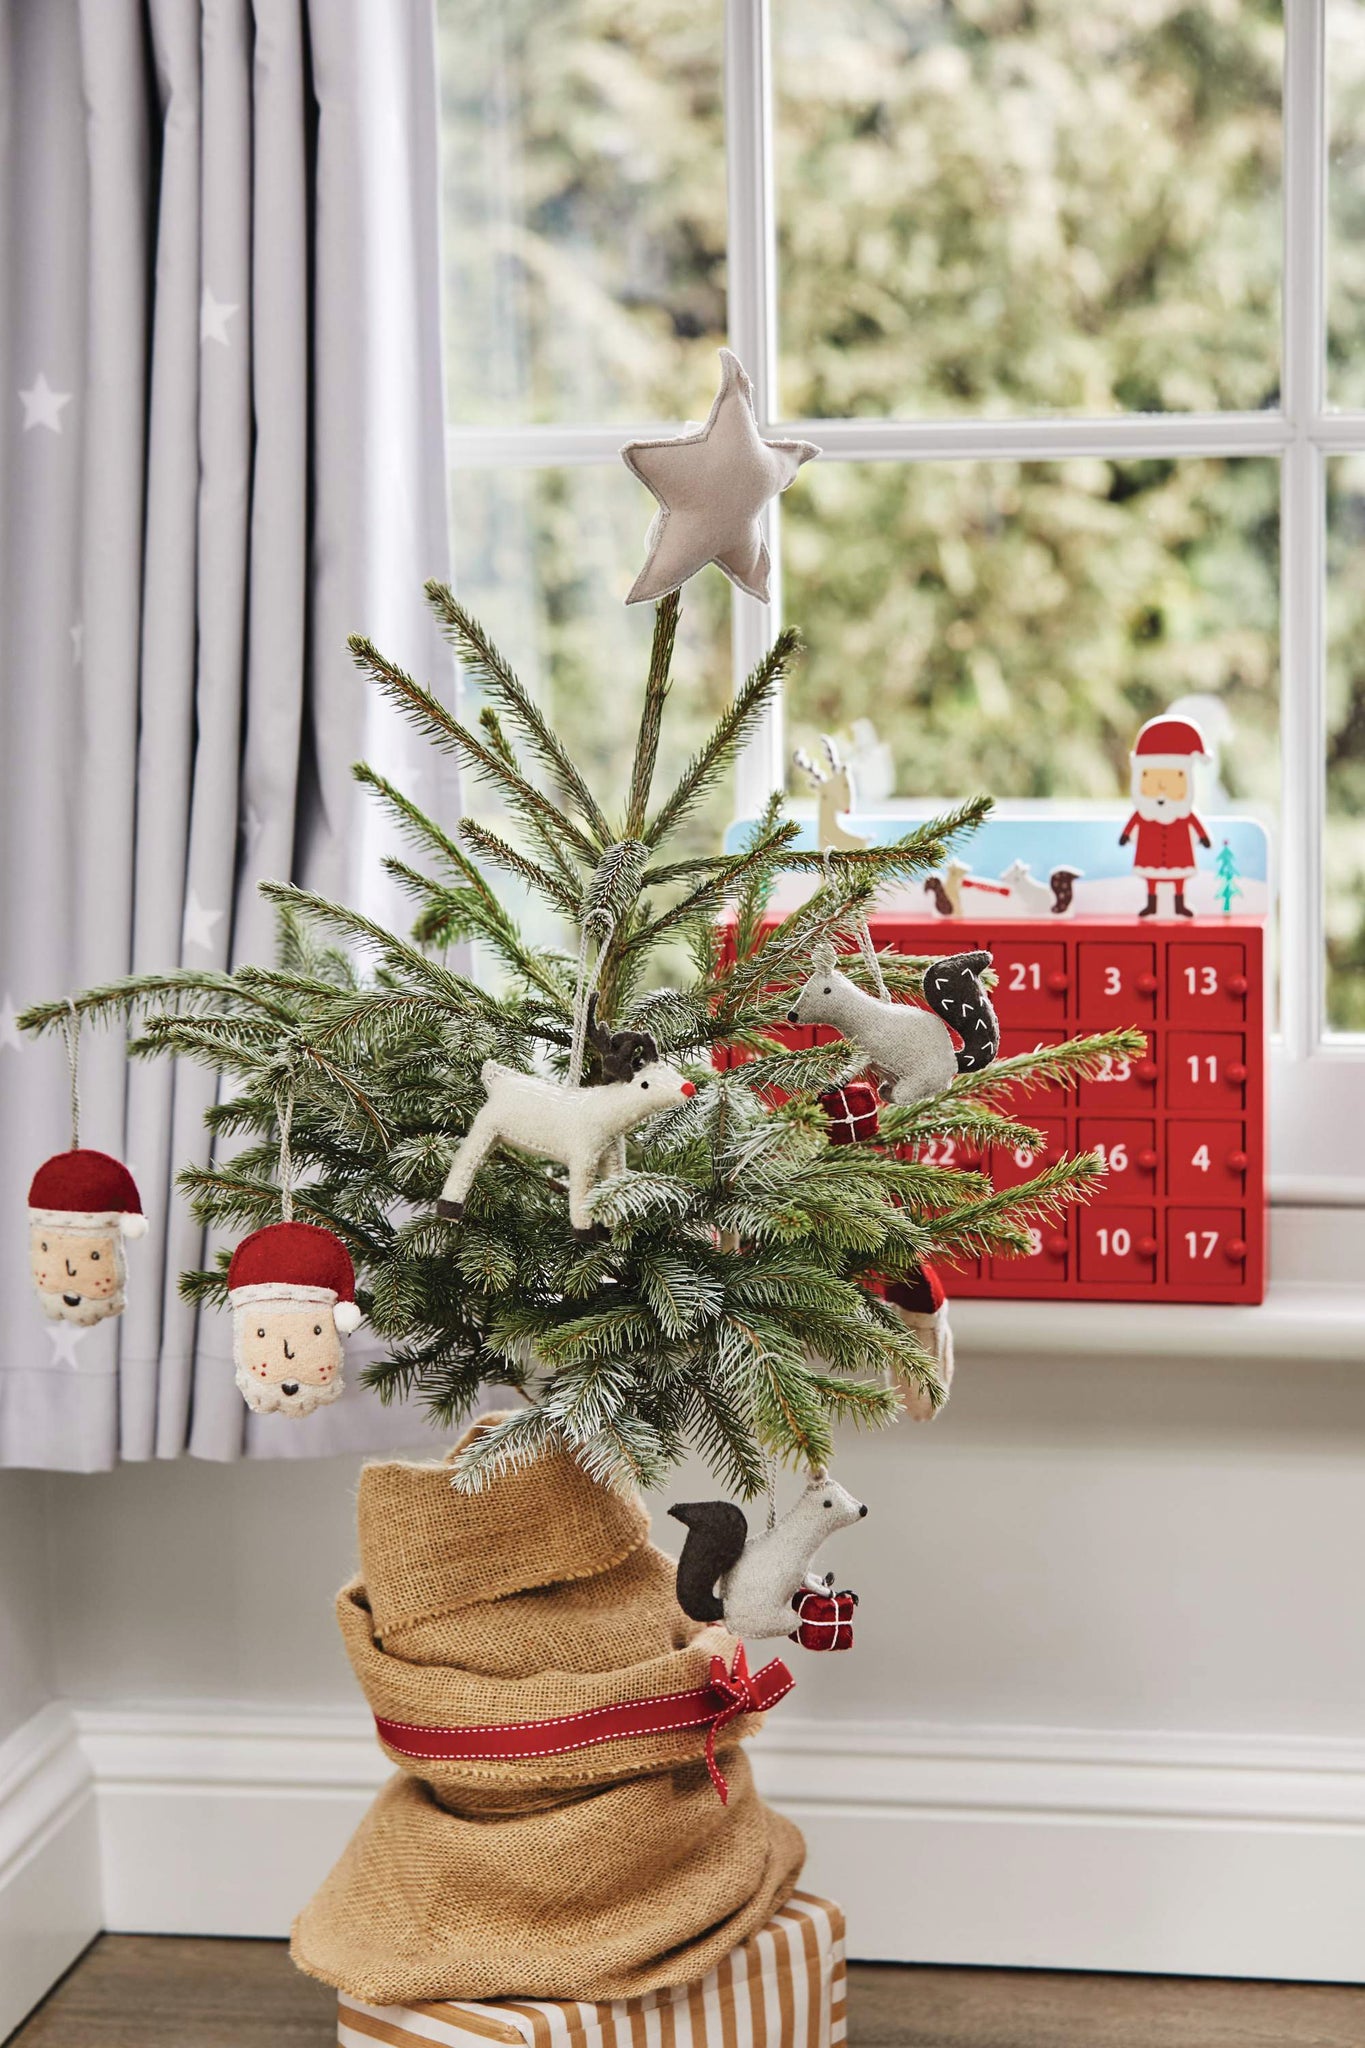 Decorate your child's bedroom for the festive season